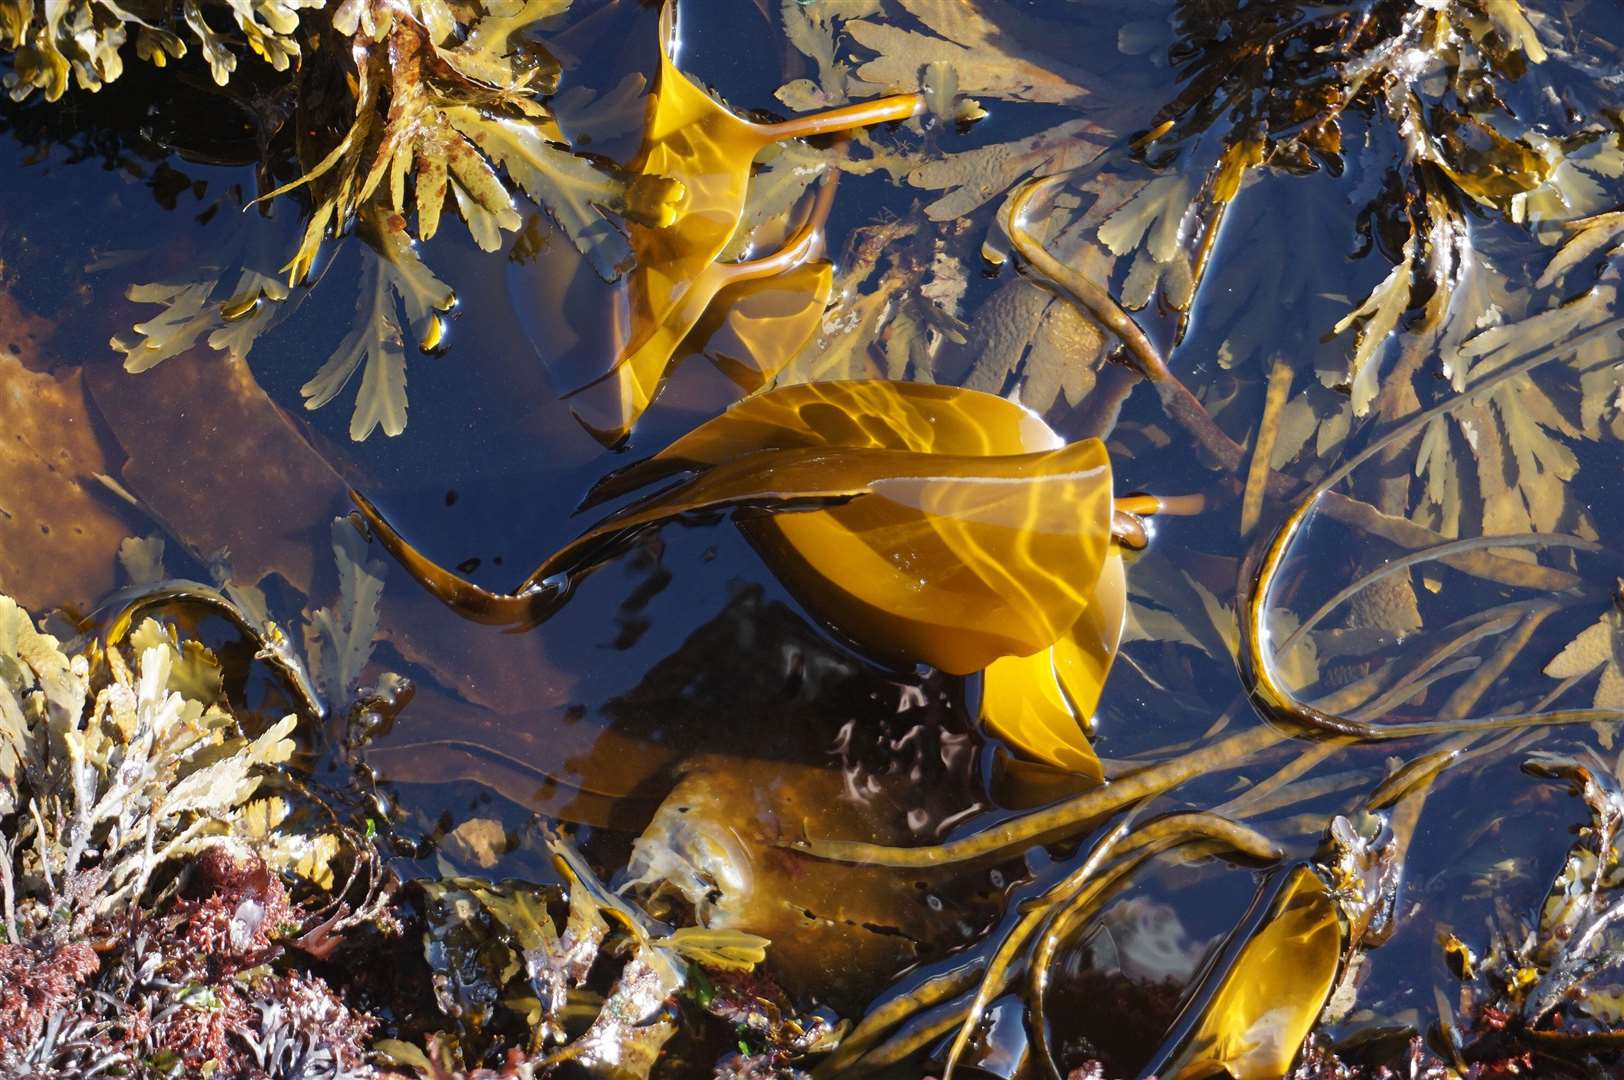 Seaweed farming could be a potential business proposition